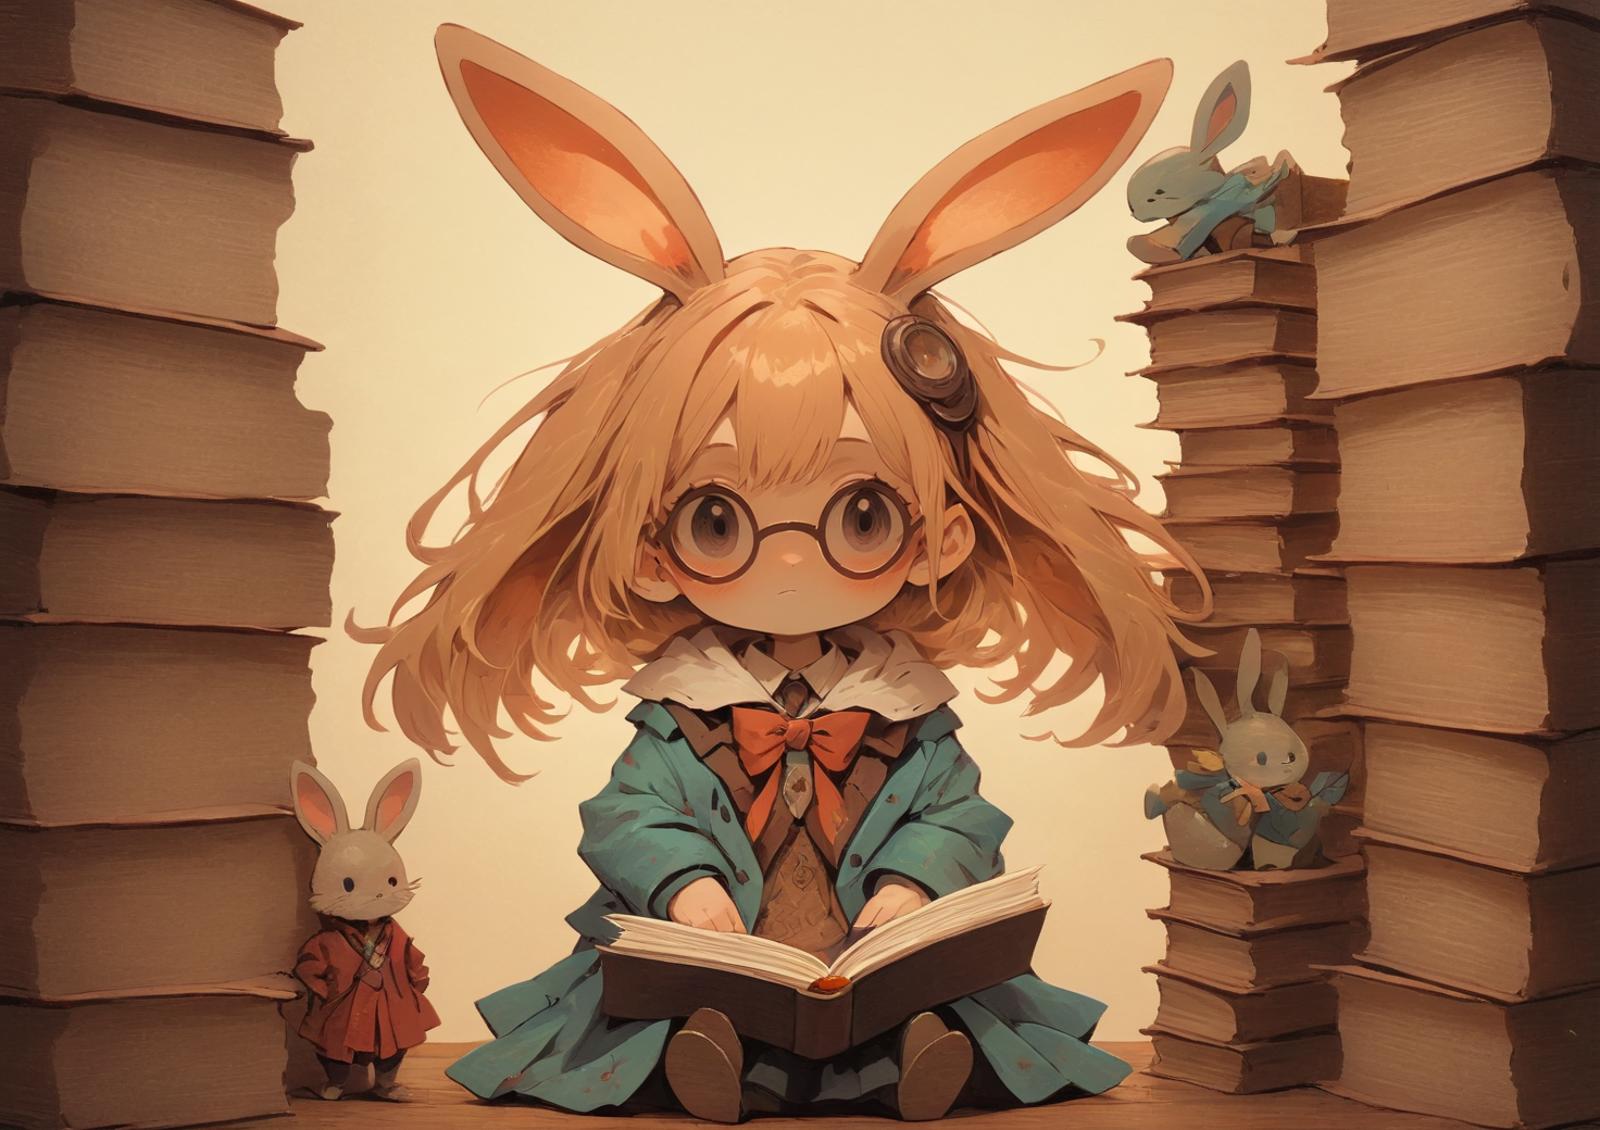 A Girl Reading a Book while Surrounded by Bunnies and Books